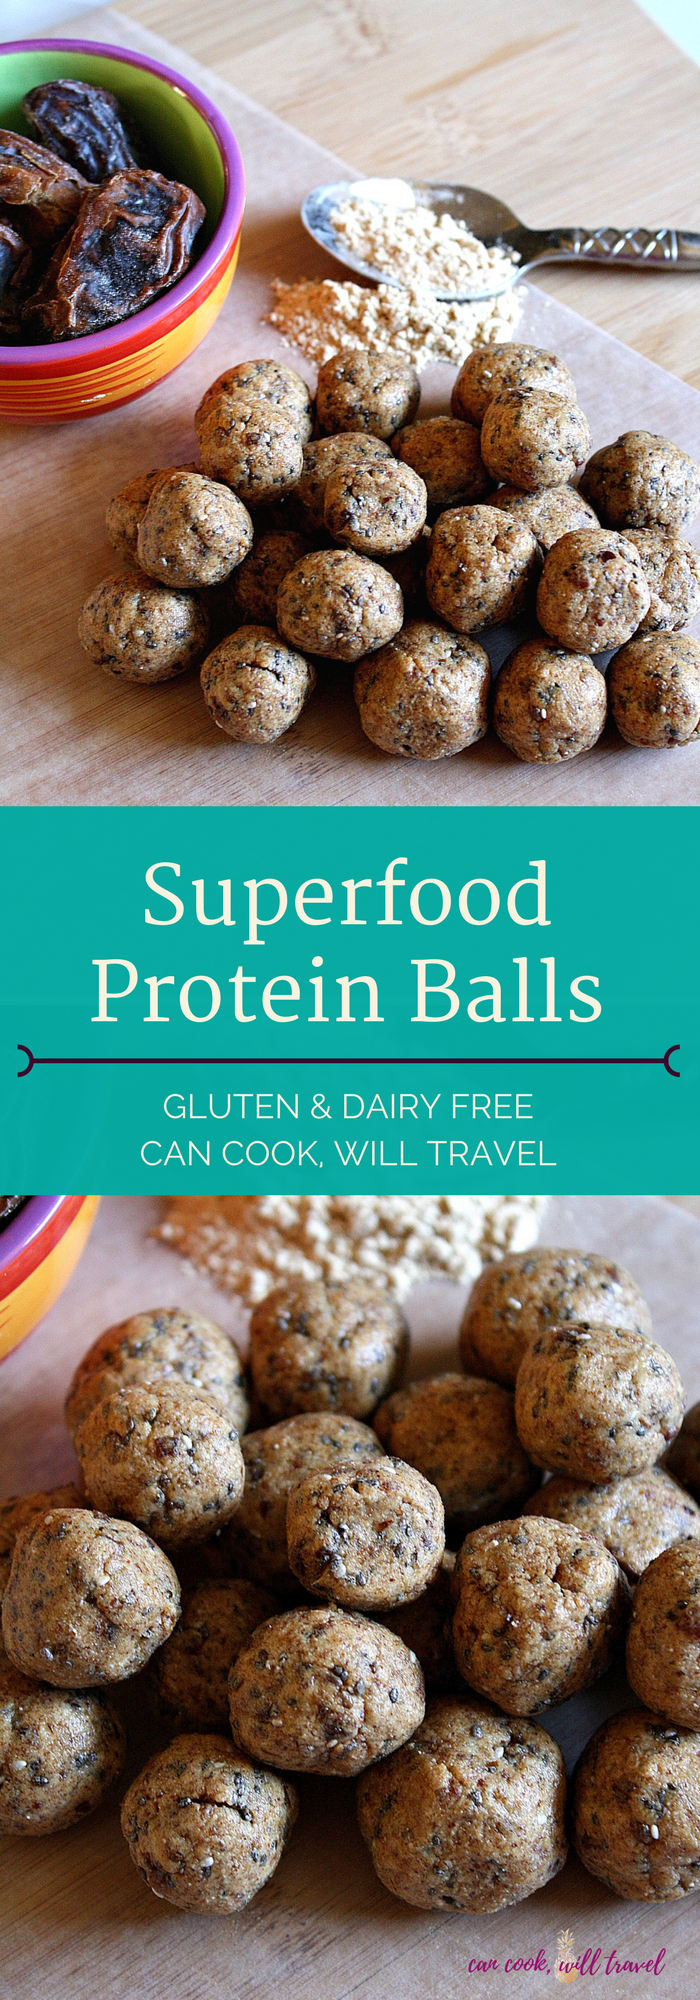 Superfood Protein Balls_Collage1